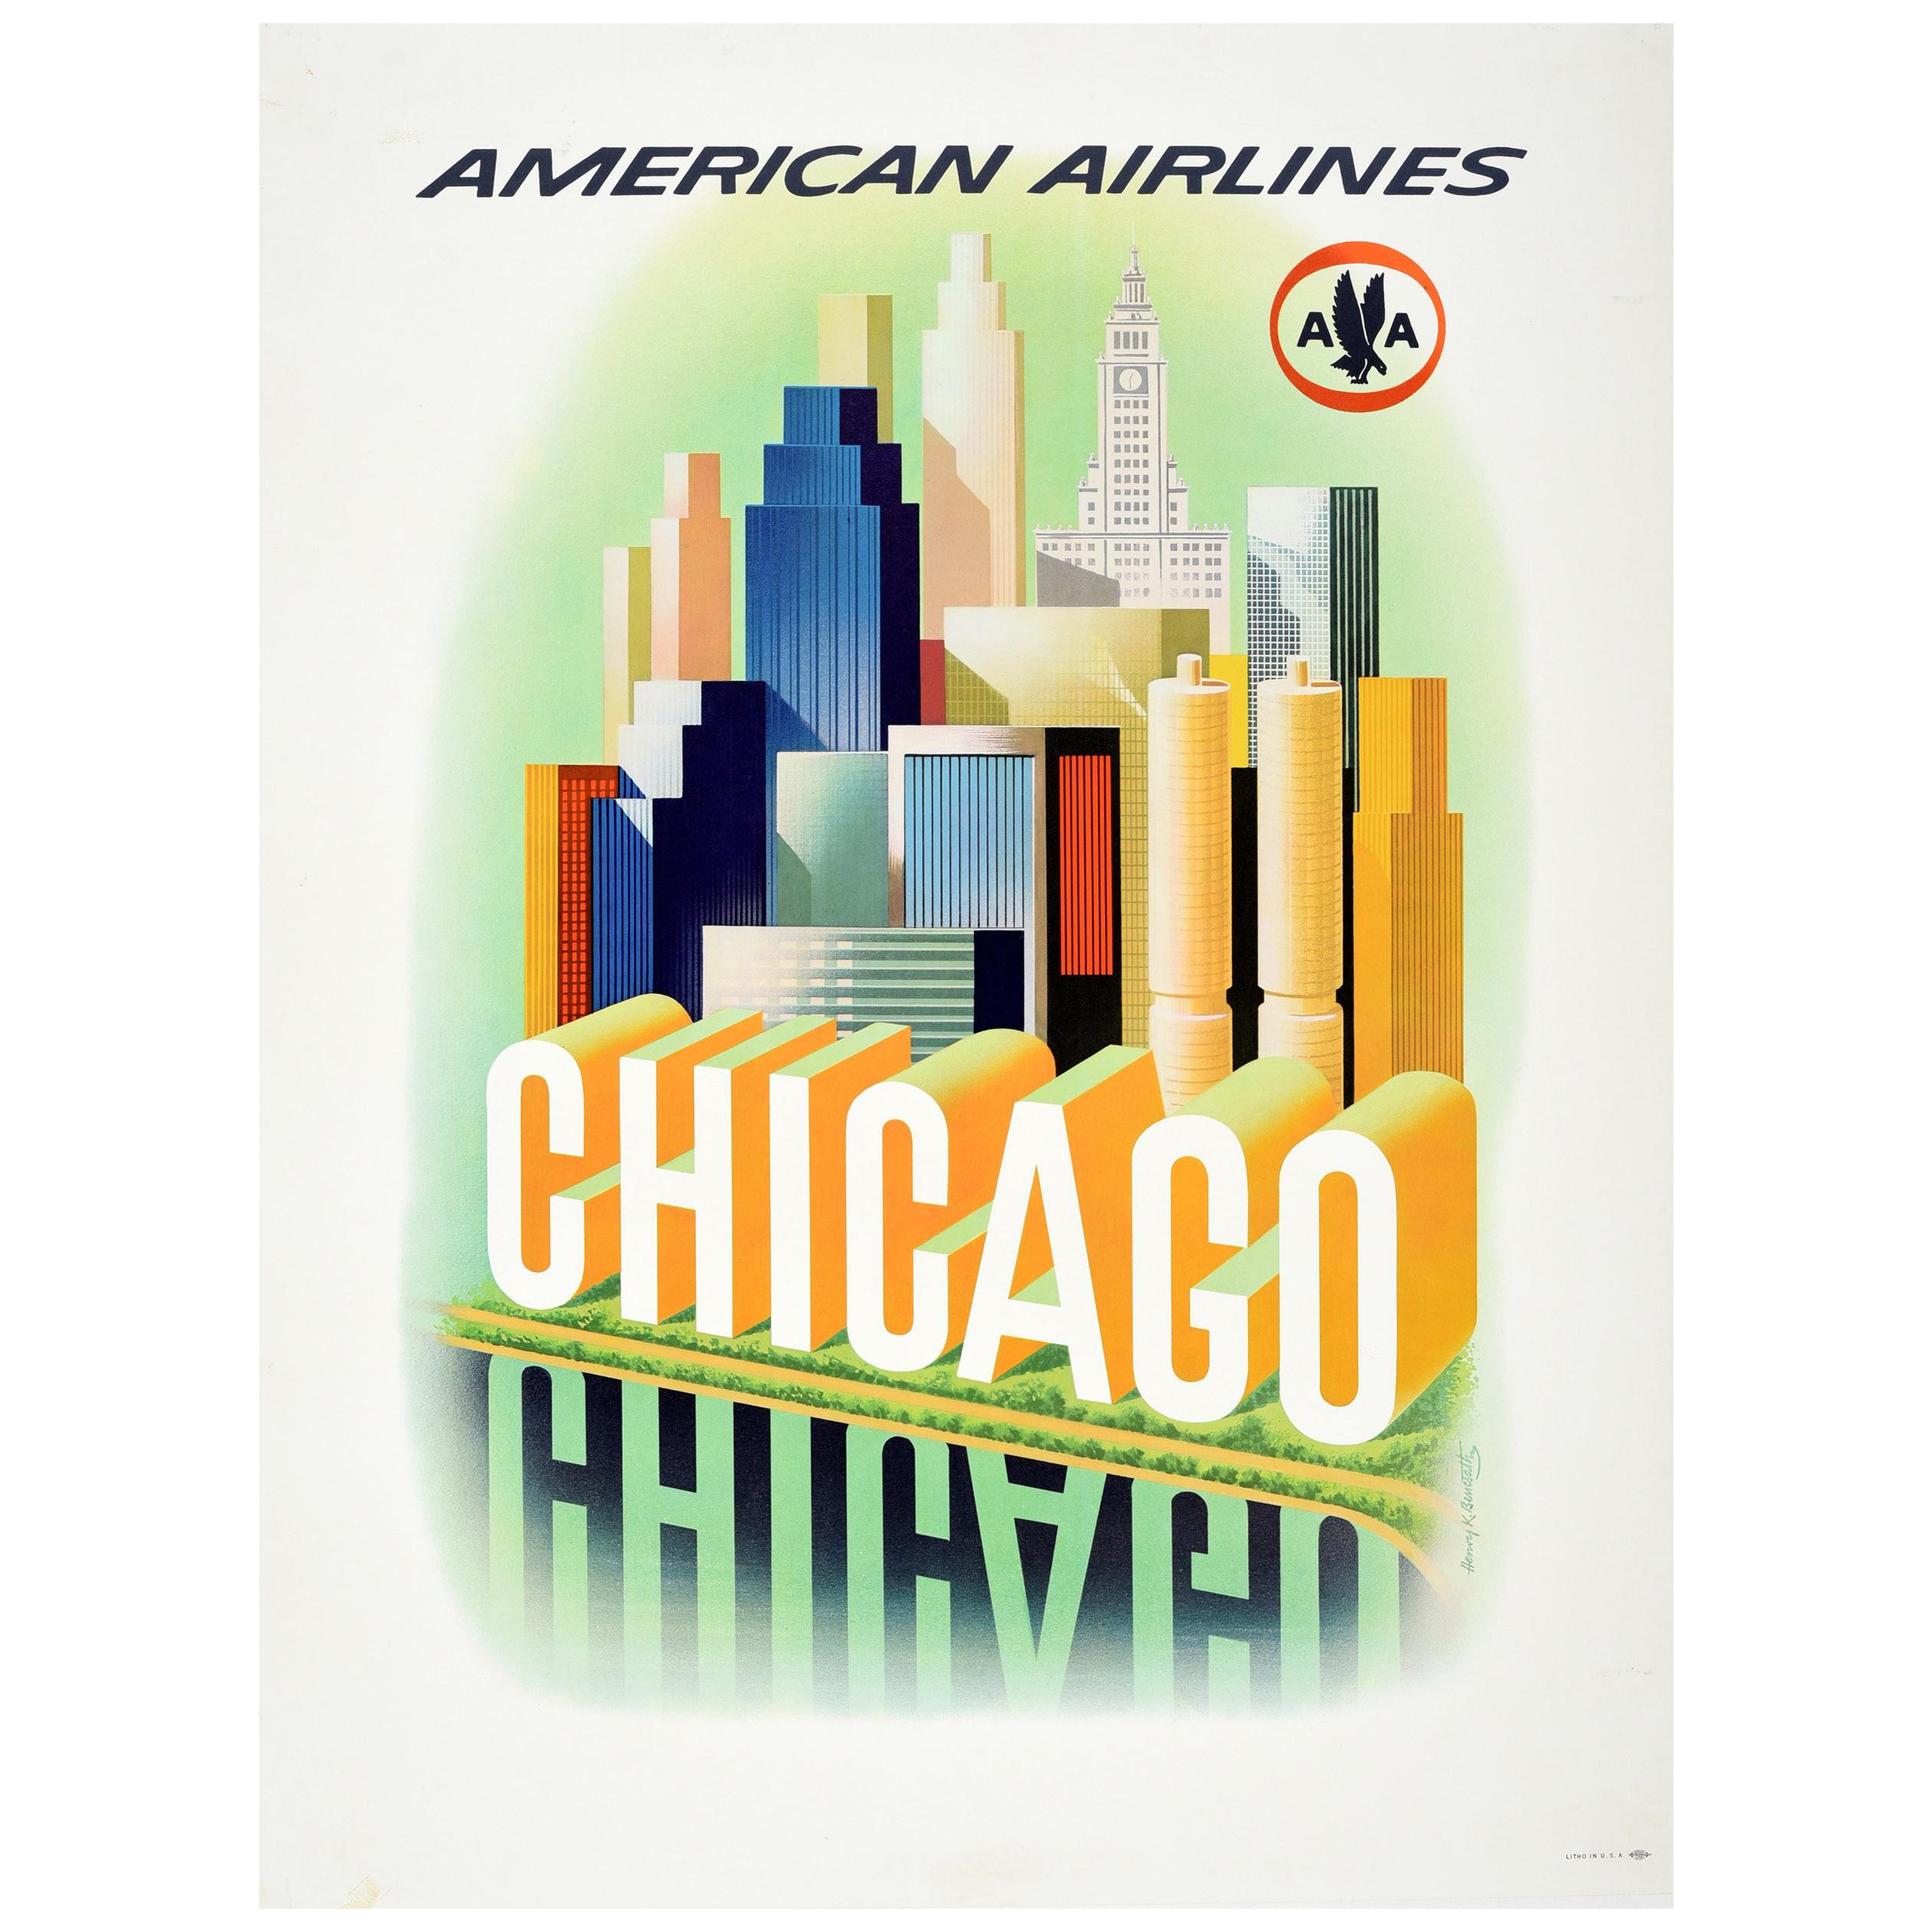 VINTAGE AMERICAN AIRLINES ASTROJET TRAVEL A4 POSTER PRINT 